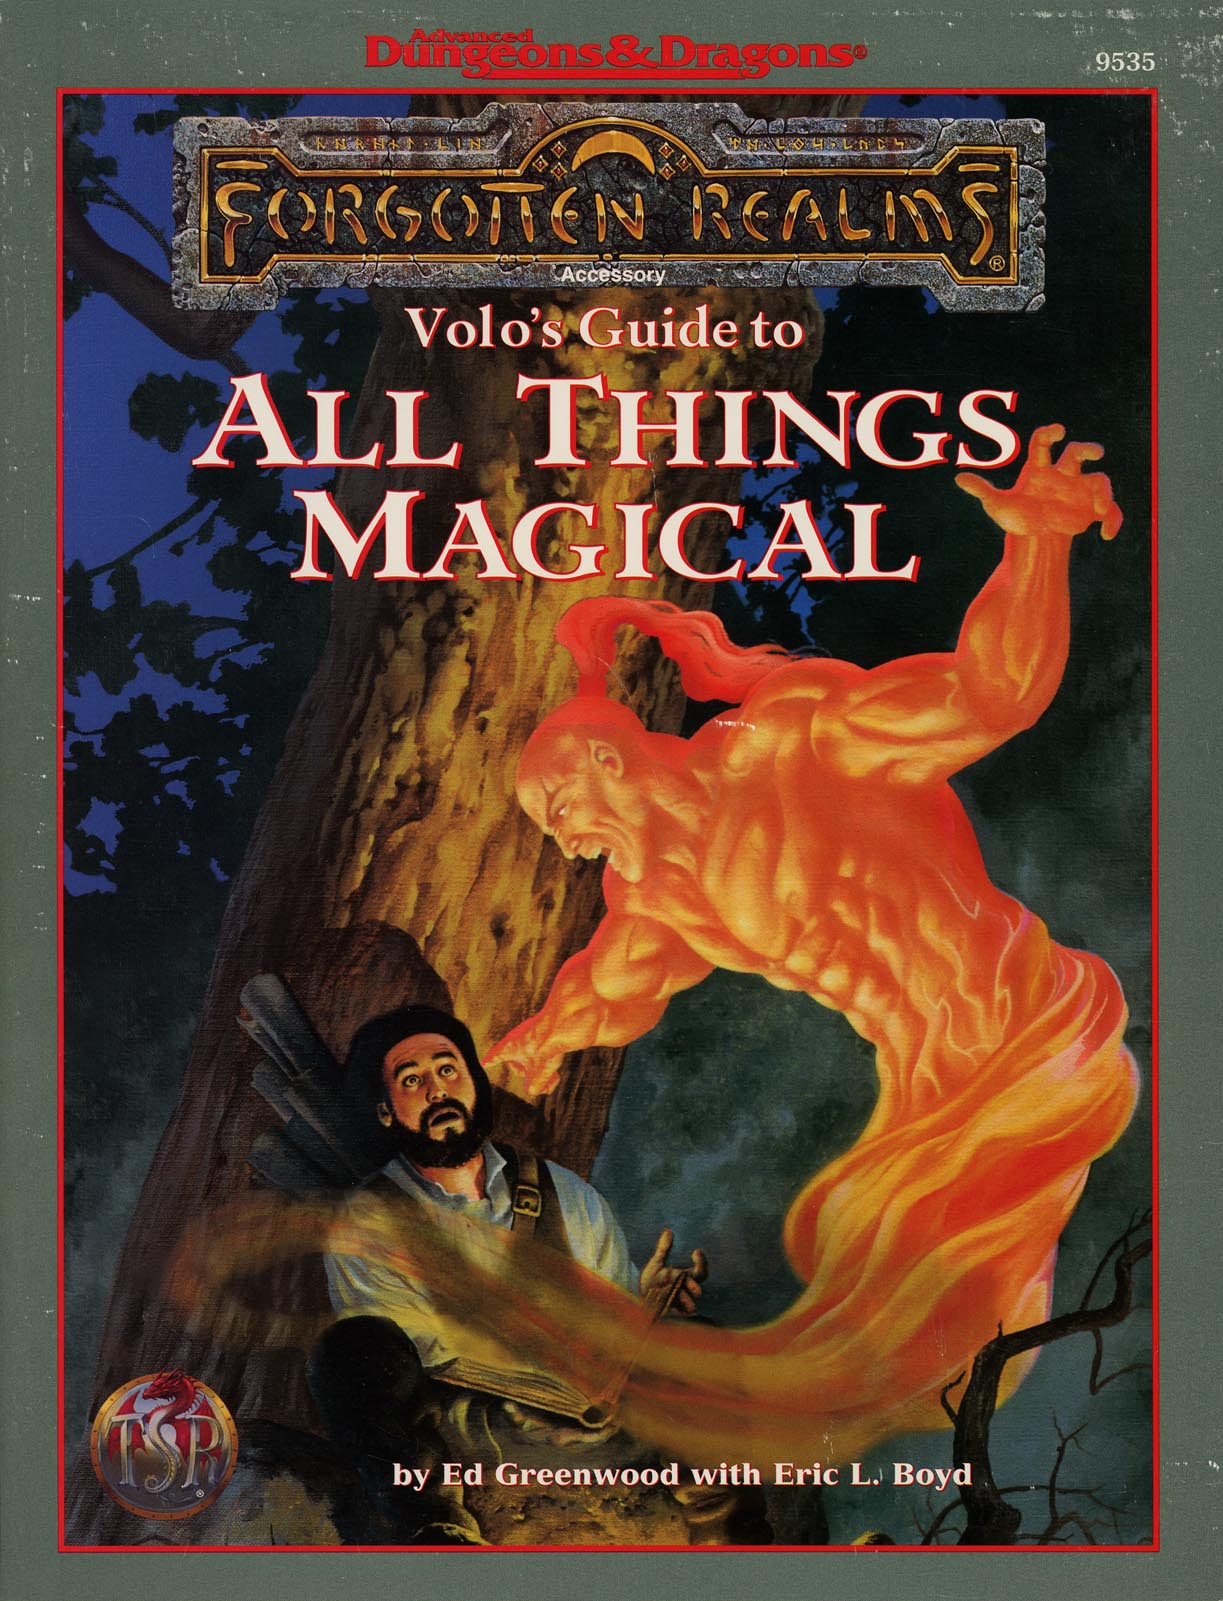 Volo's Guide to All Things MagicalCover art